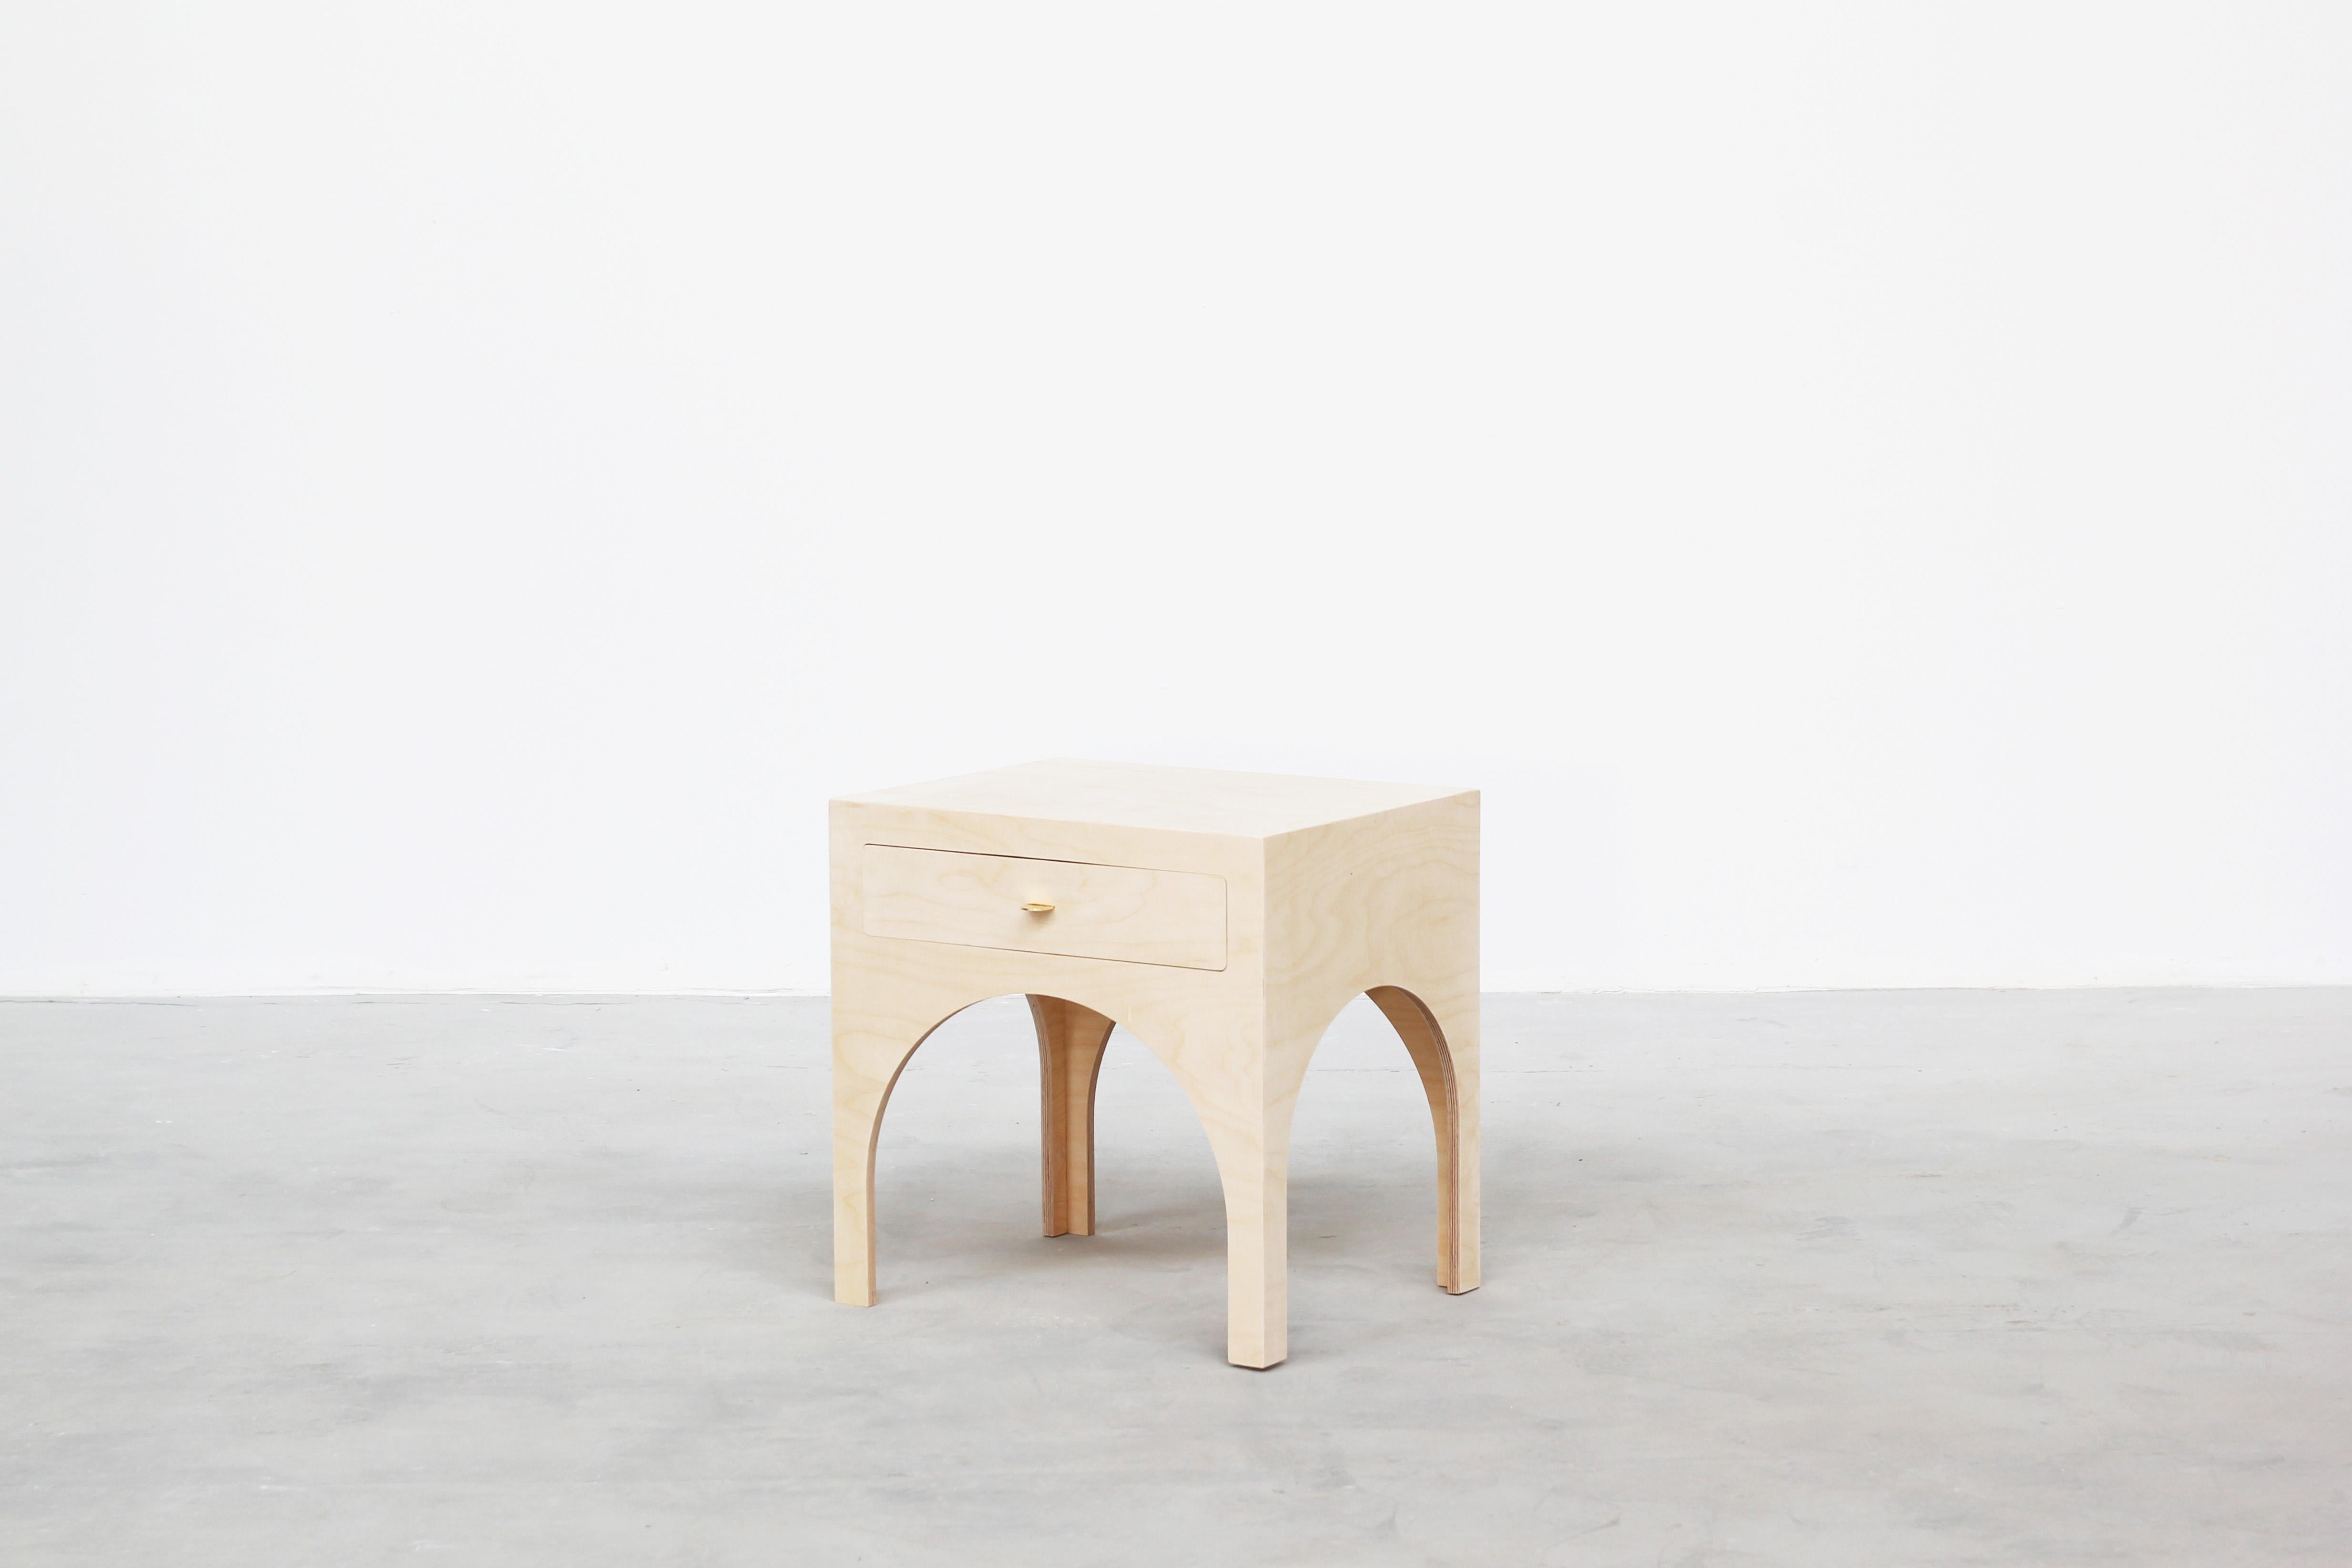 German Pair of Minimalist Nightstands Consoles Commodes by Atelier Bachmann, 2019